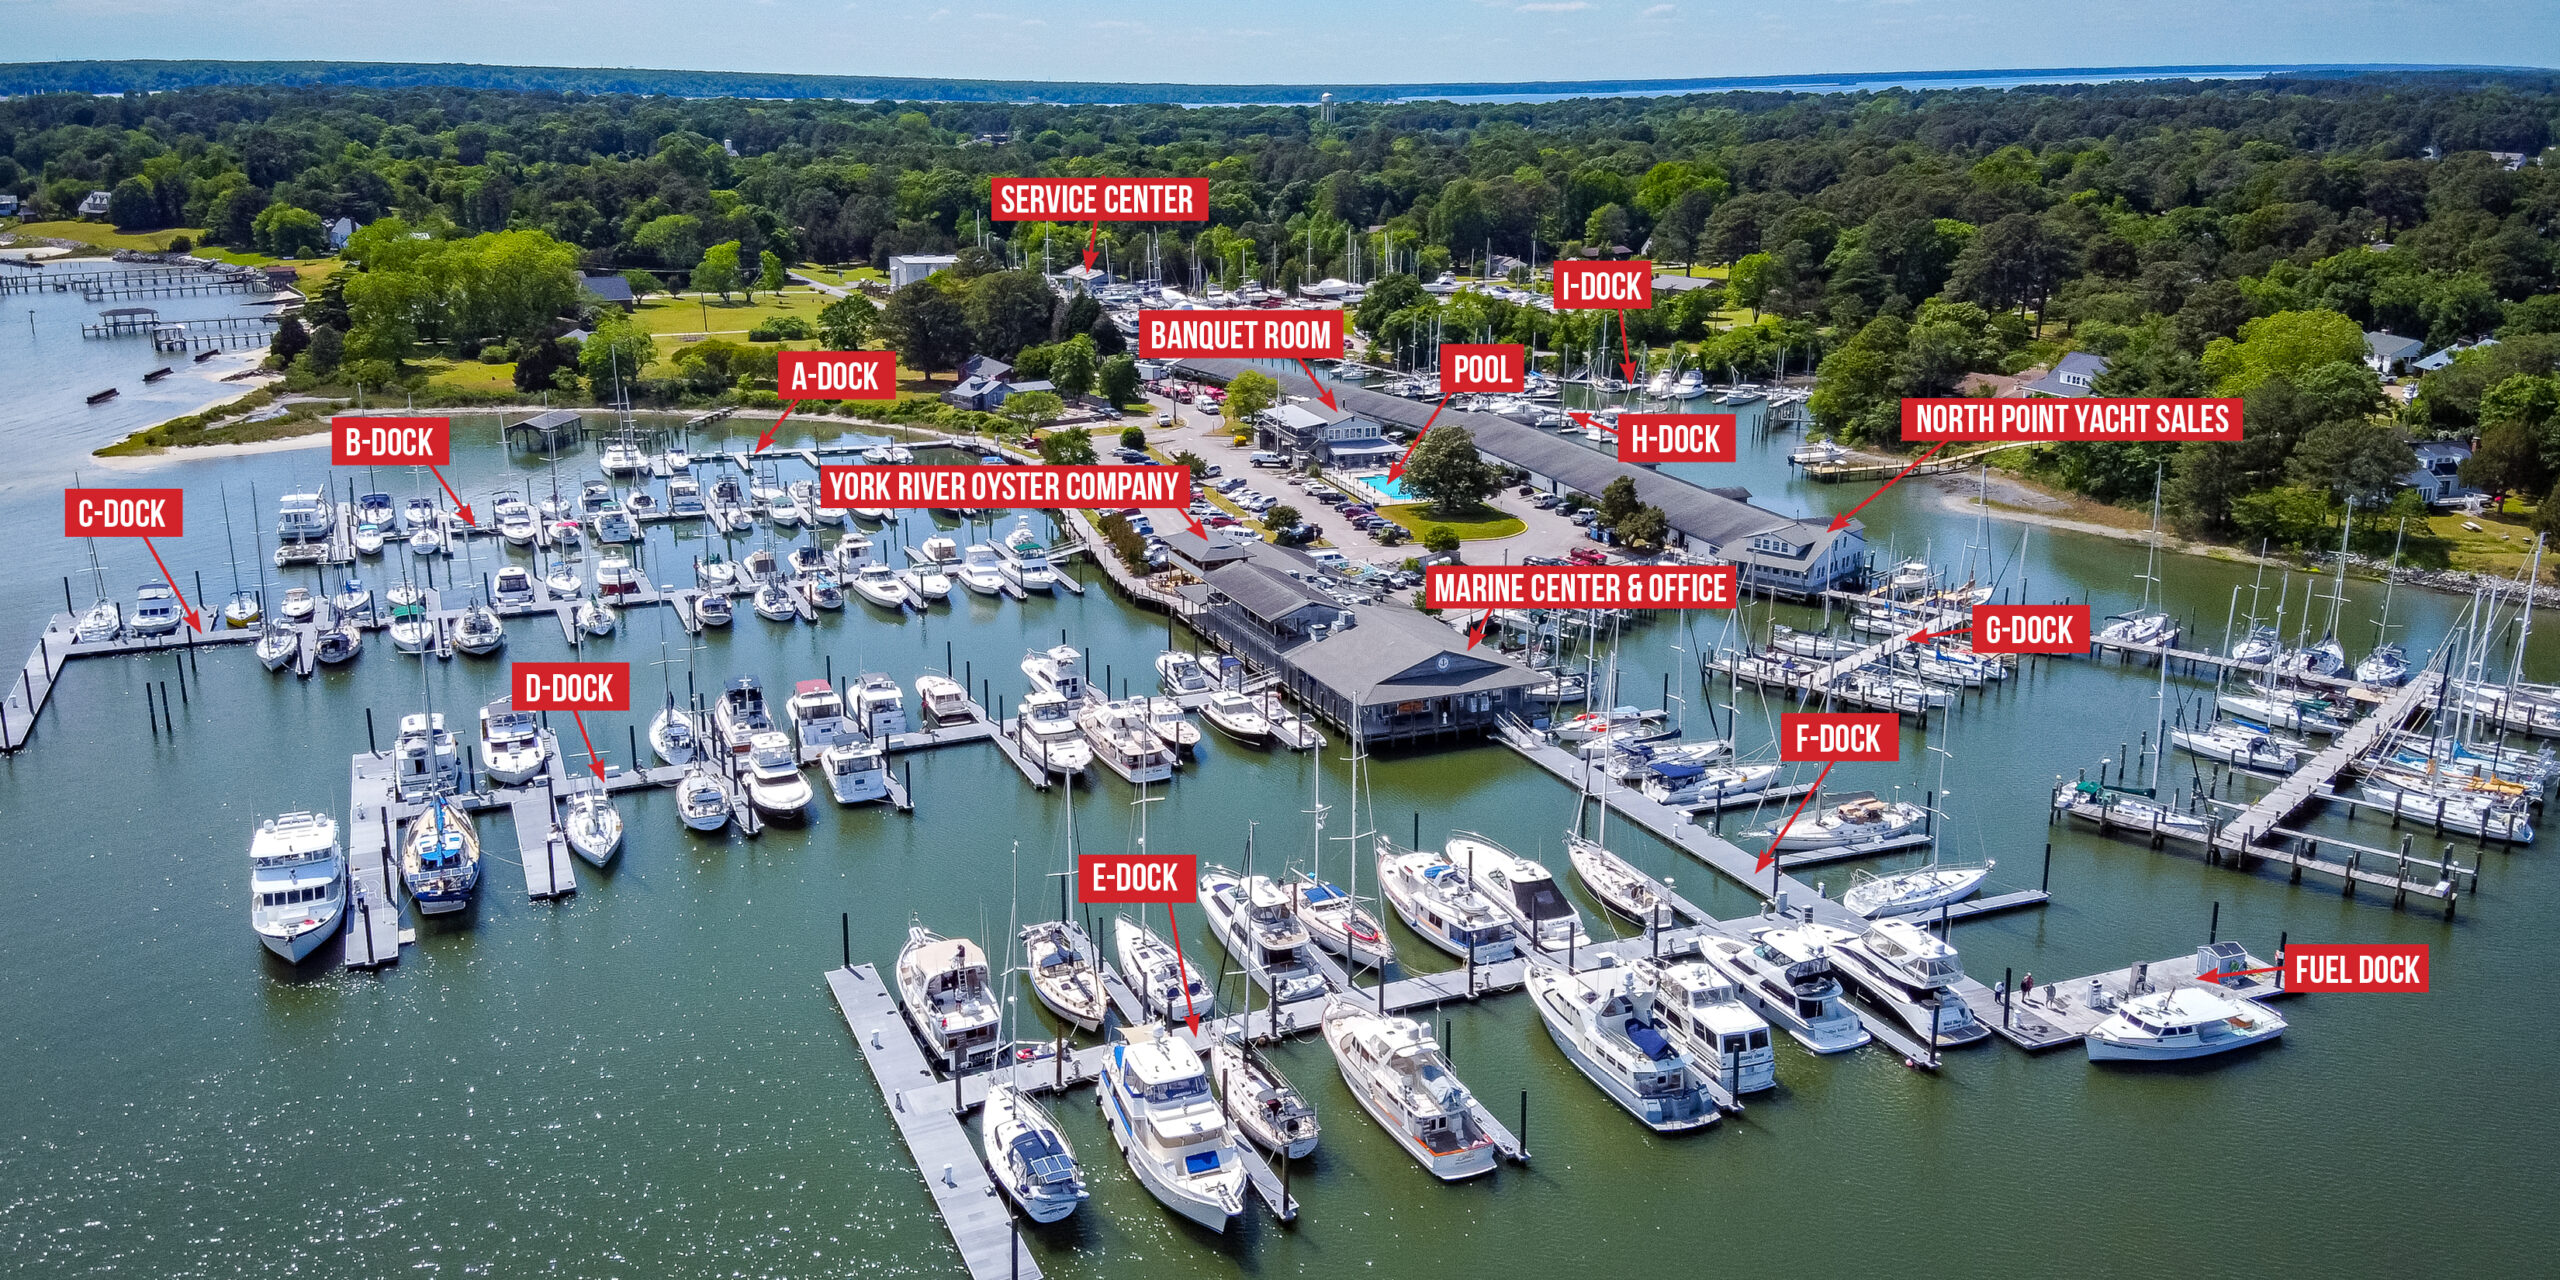 Property Map at York River Yacht Haven